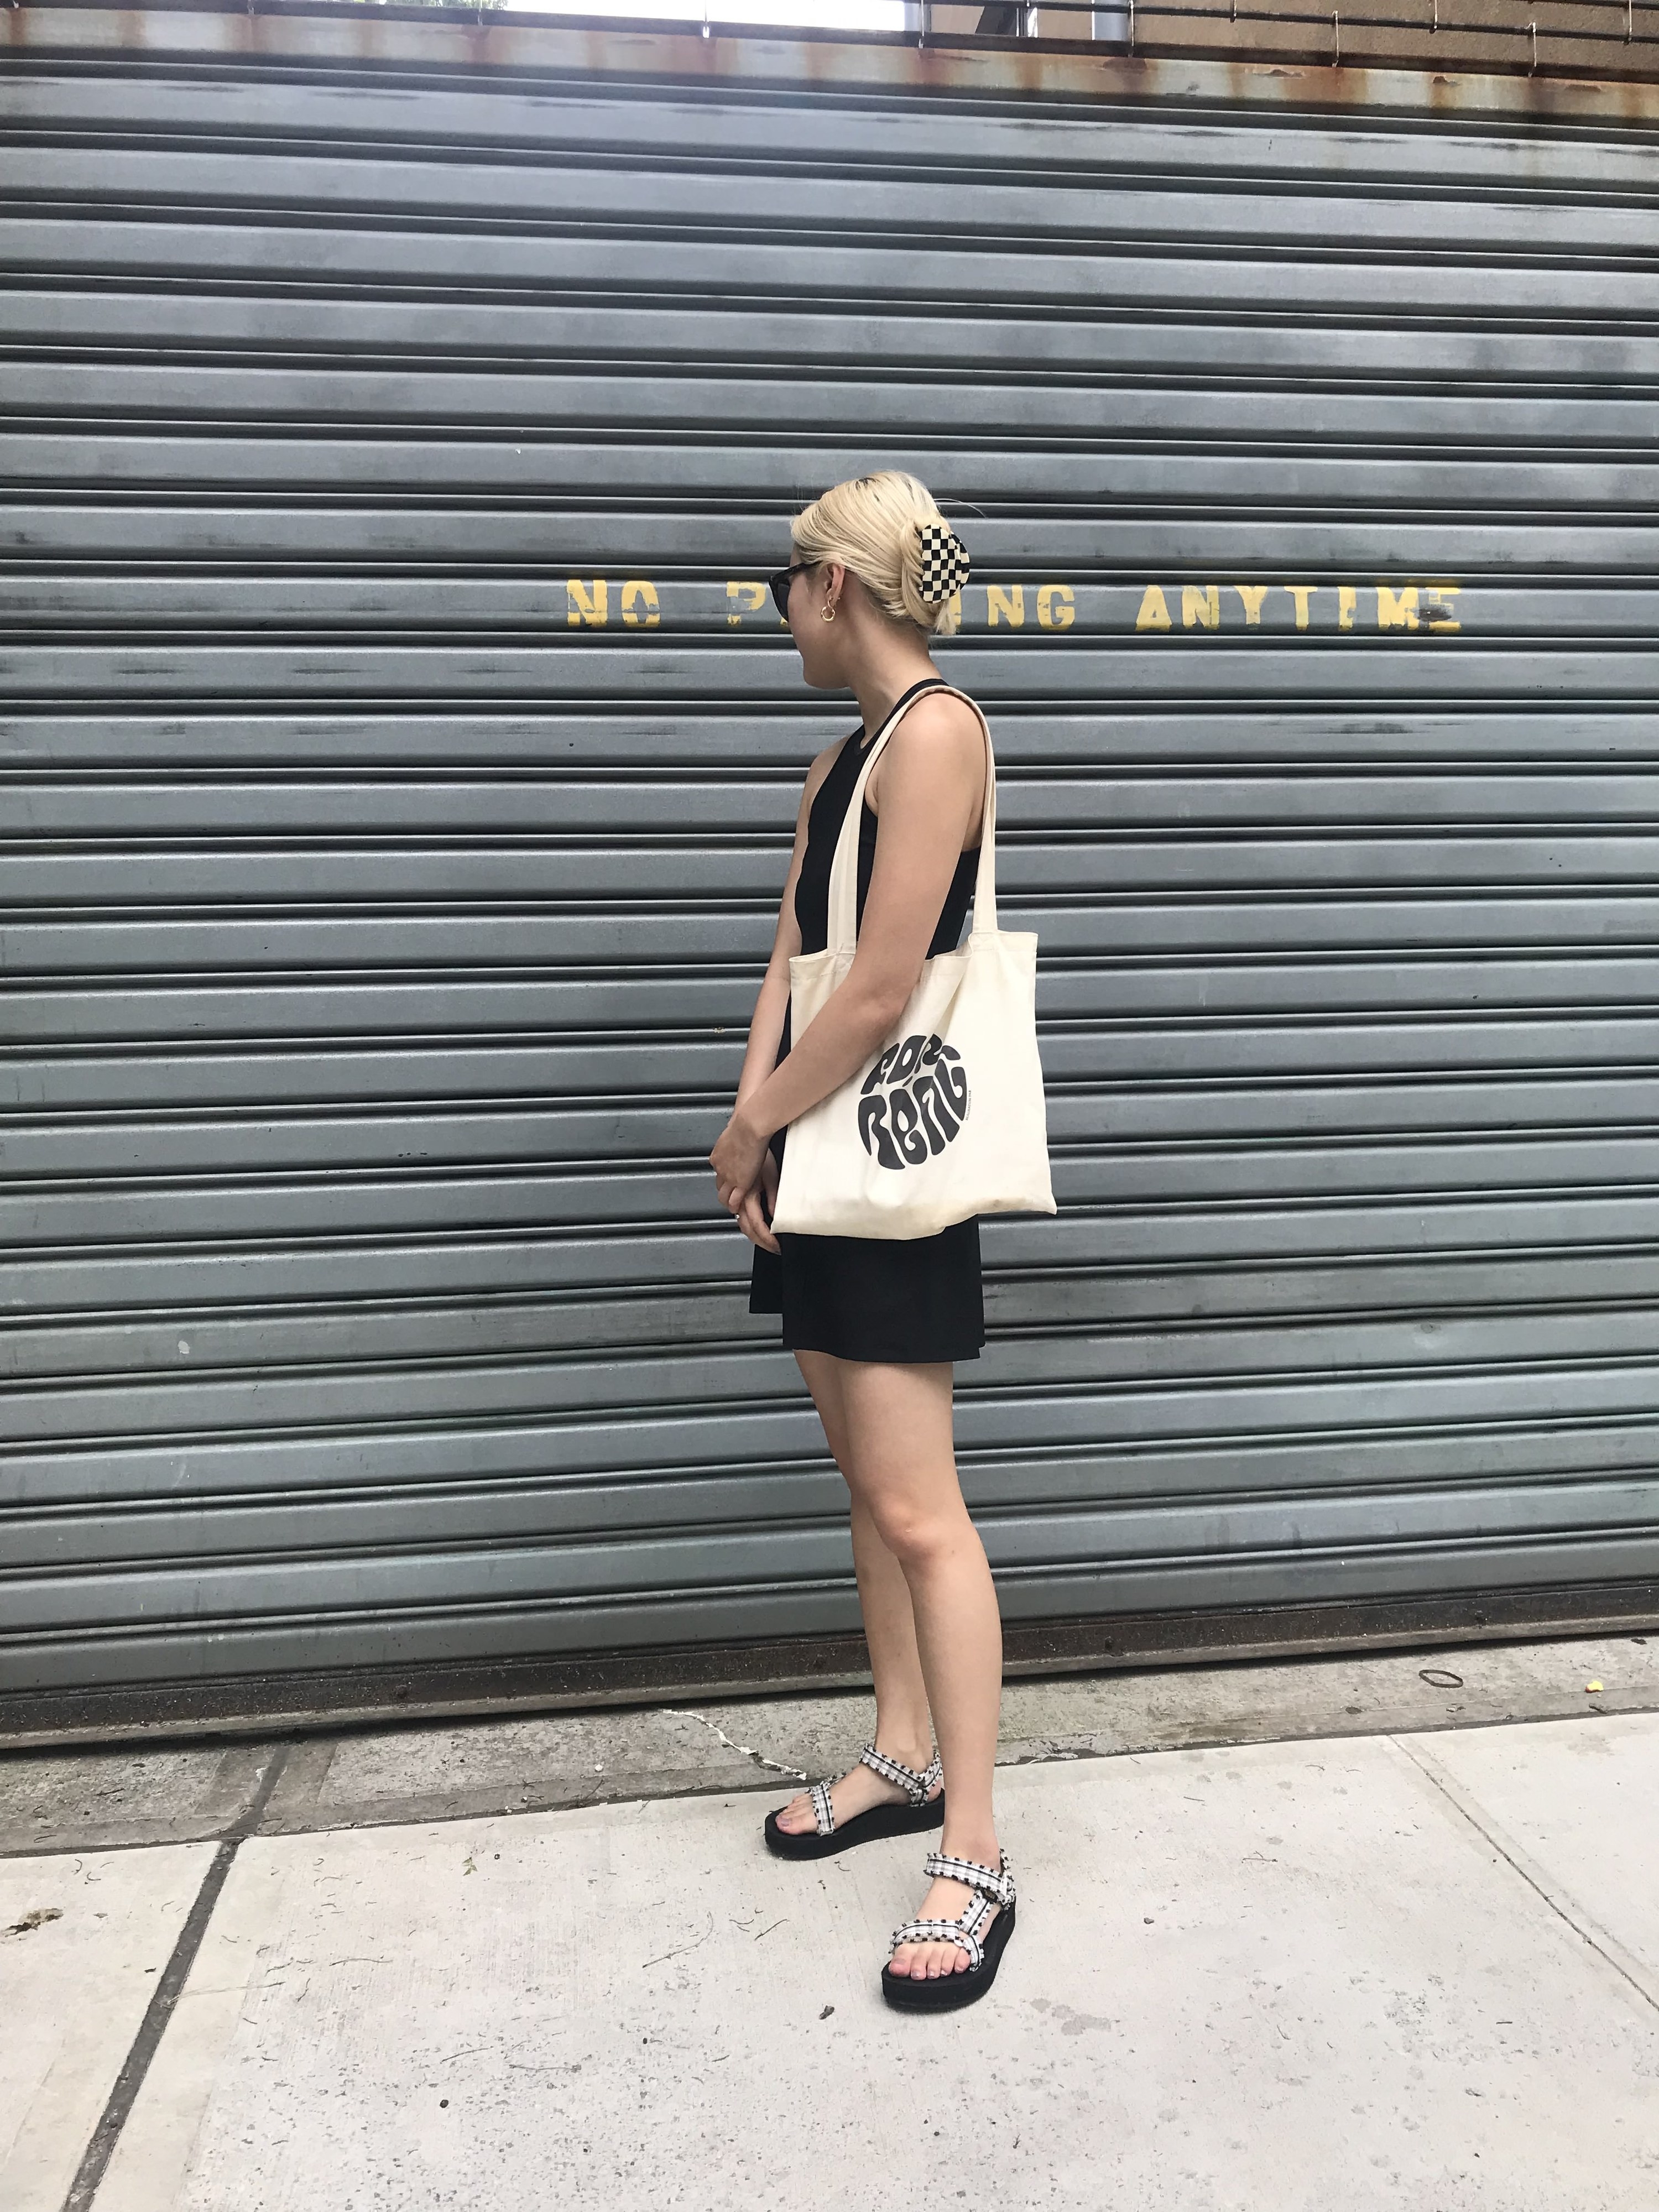 BuzzFeed editor wearing the sandals with a high-neck a-line black dress